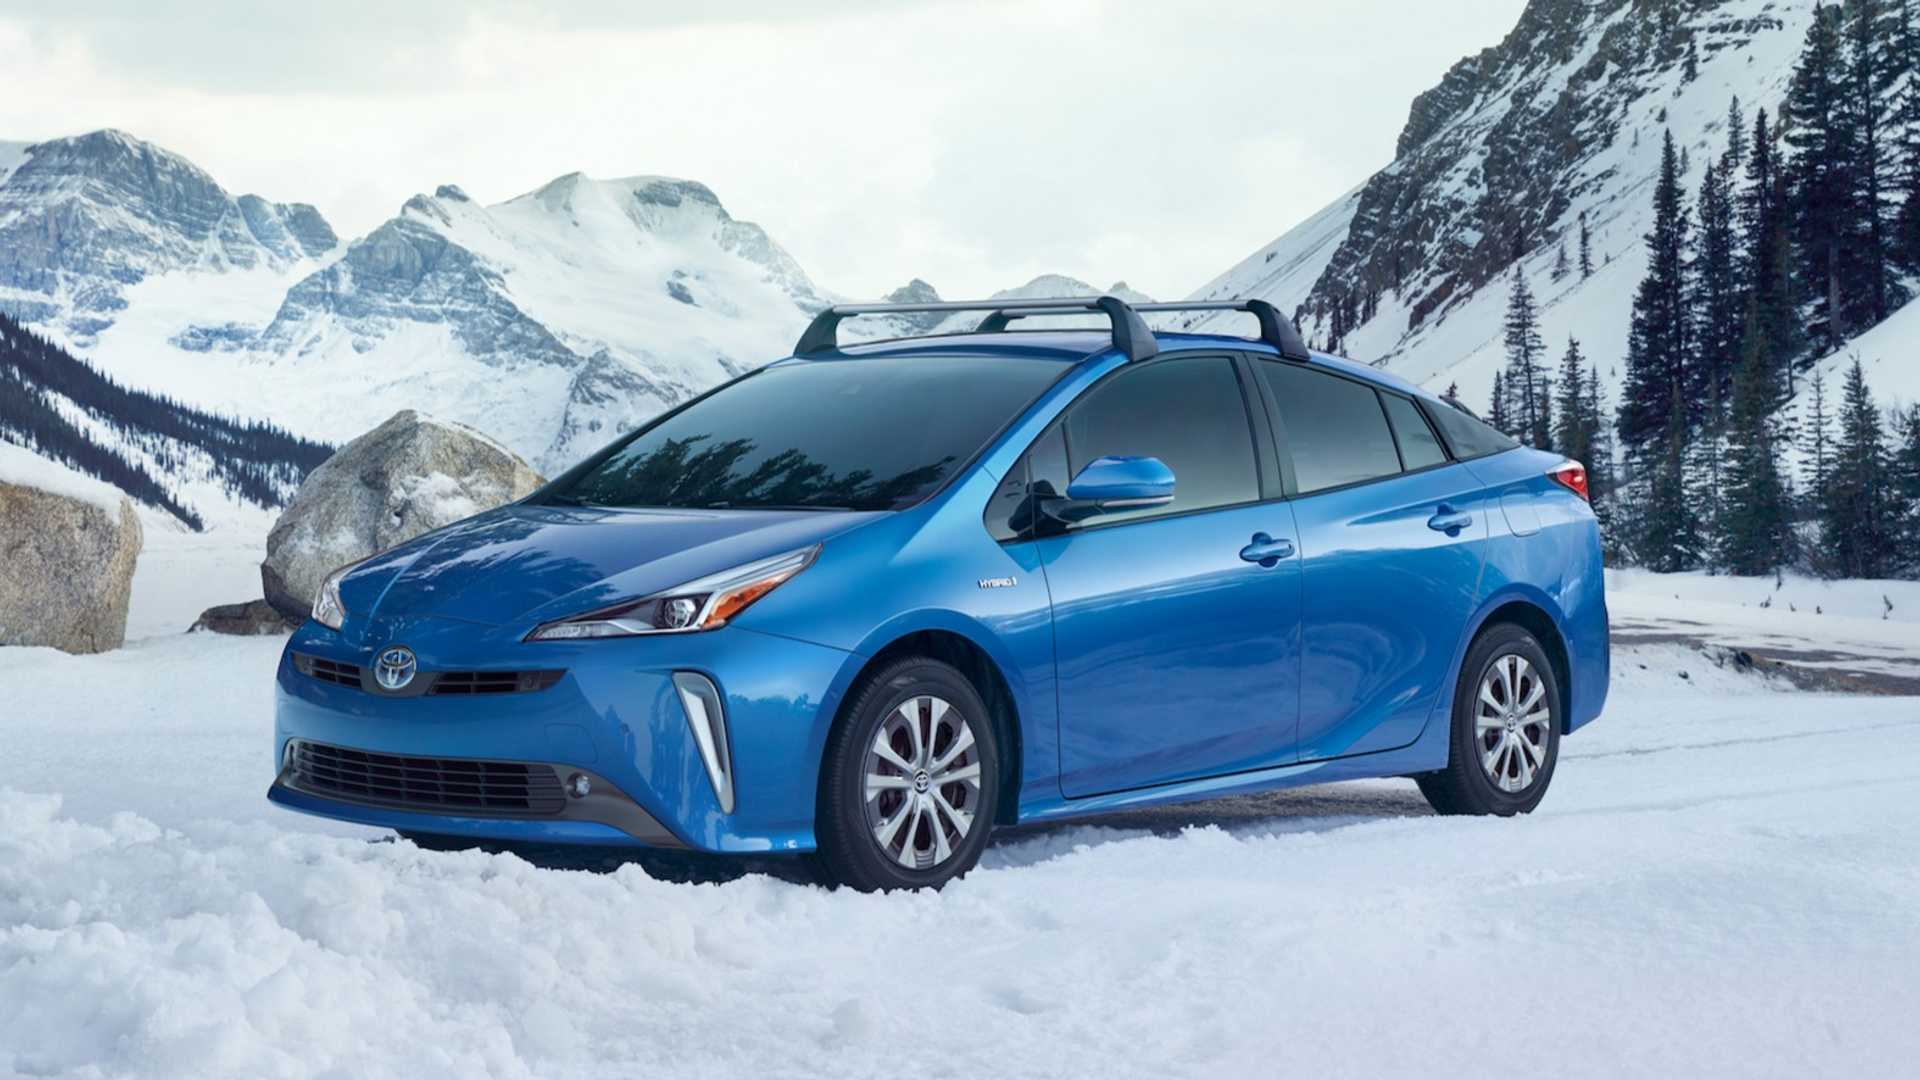 Toyota Presented The First Photos Of The New Prius Hybrid